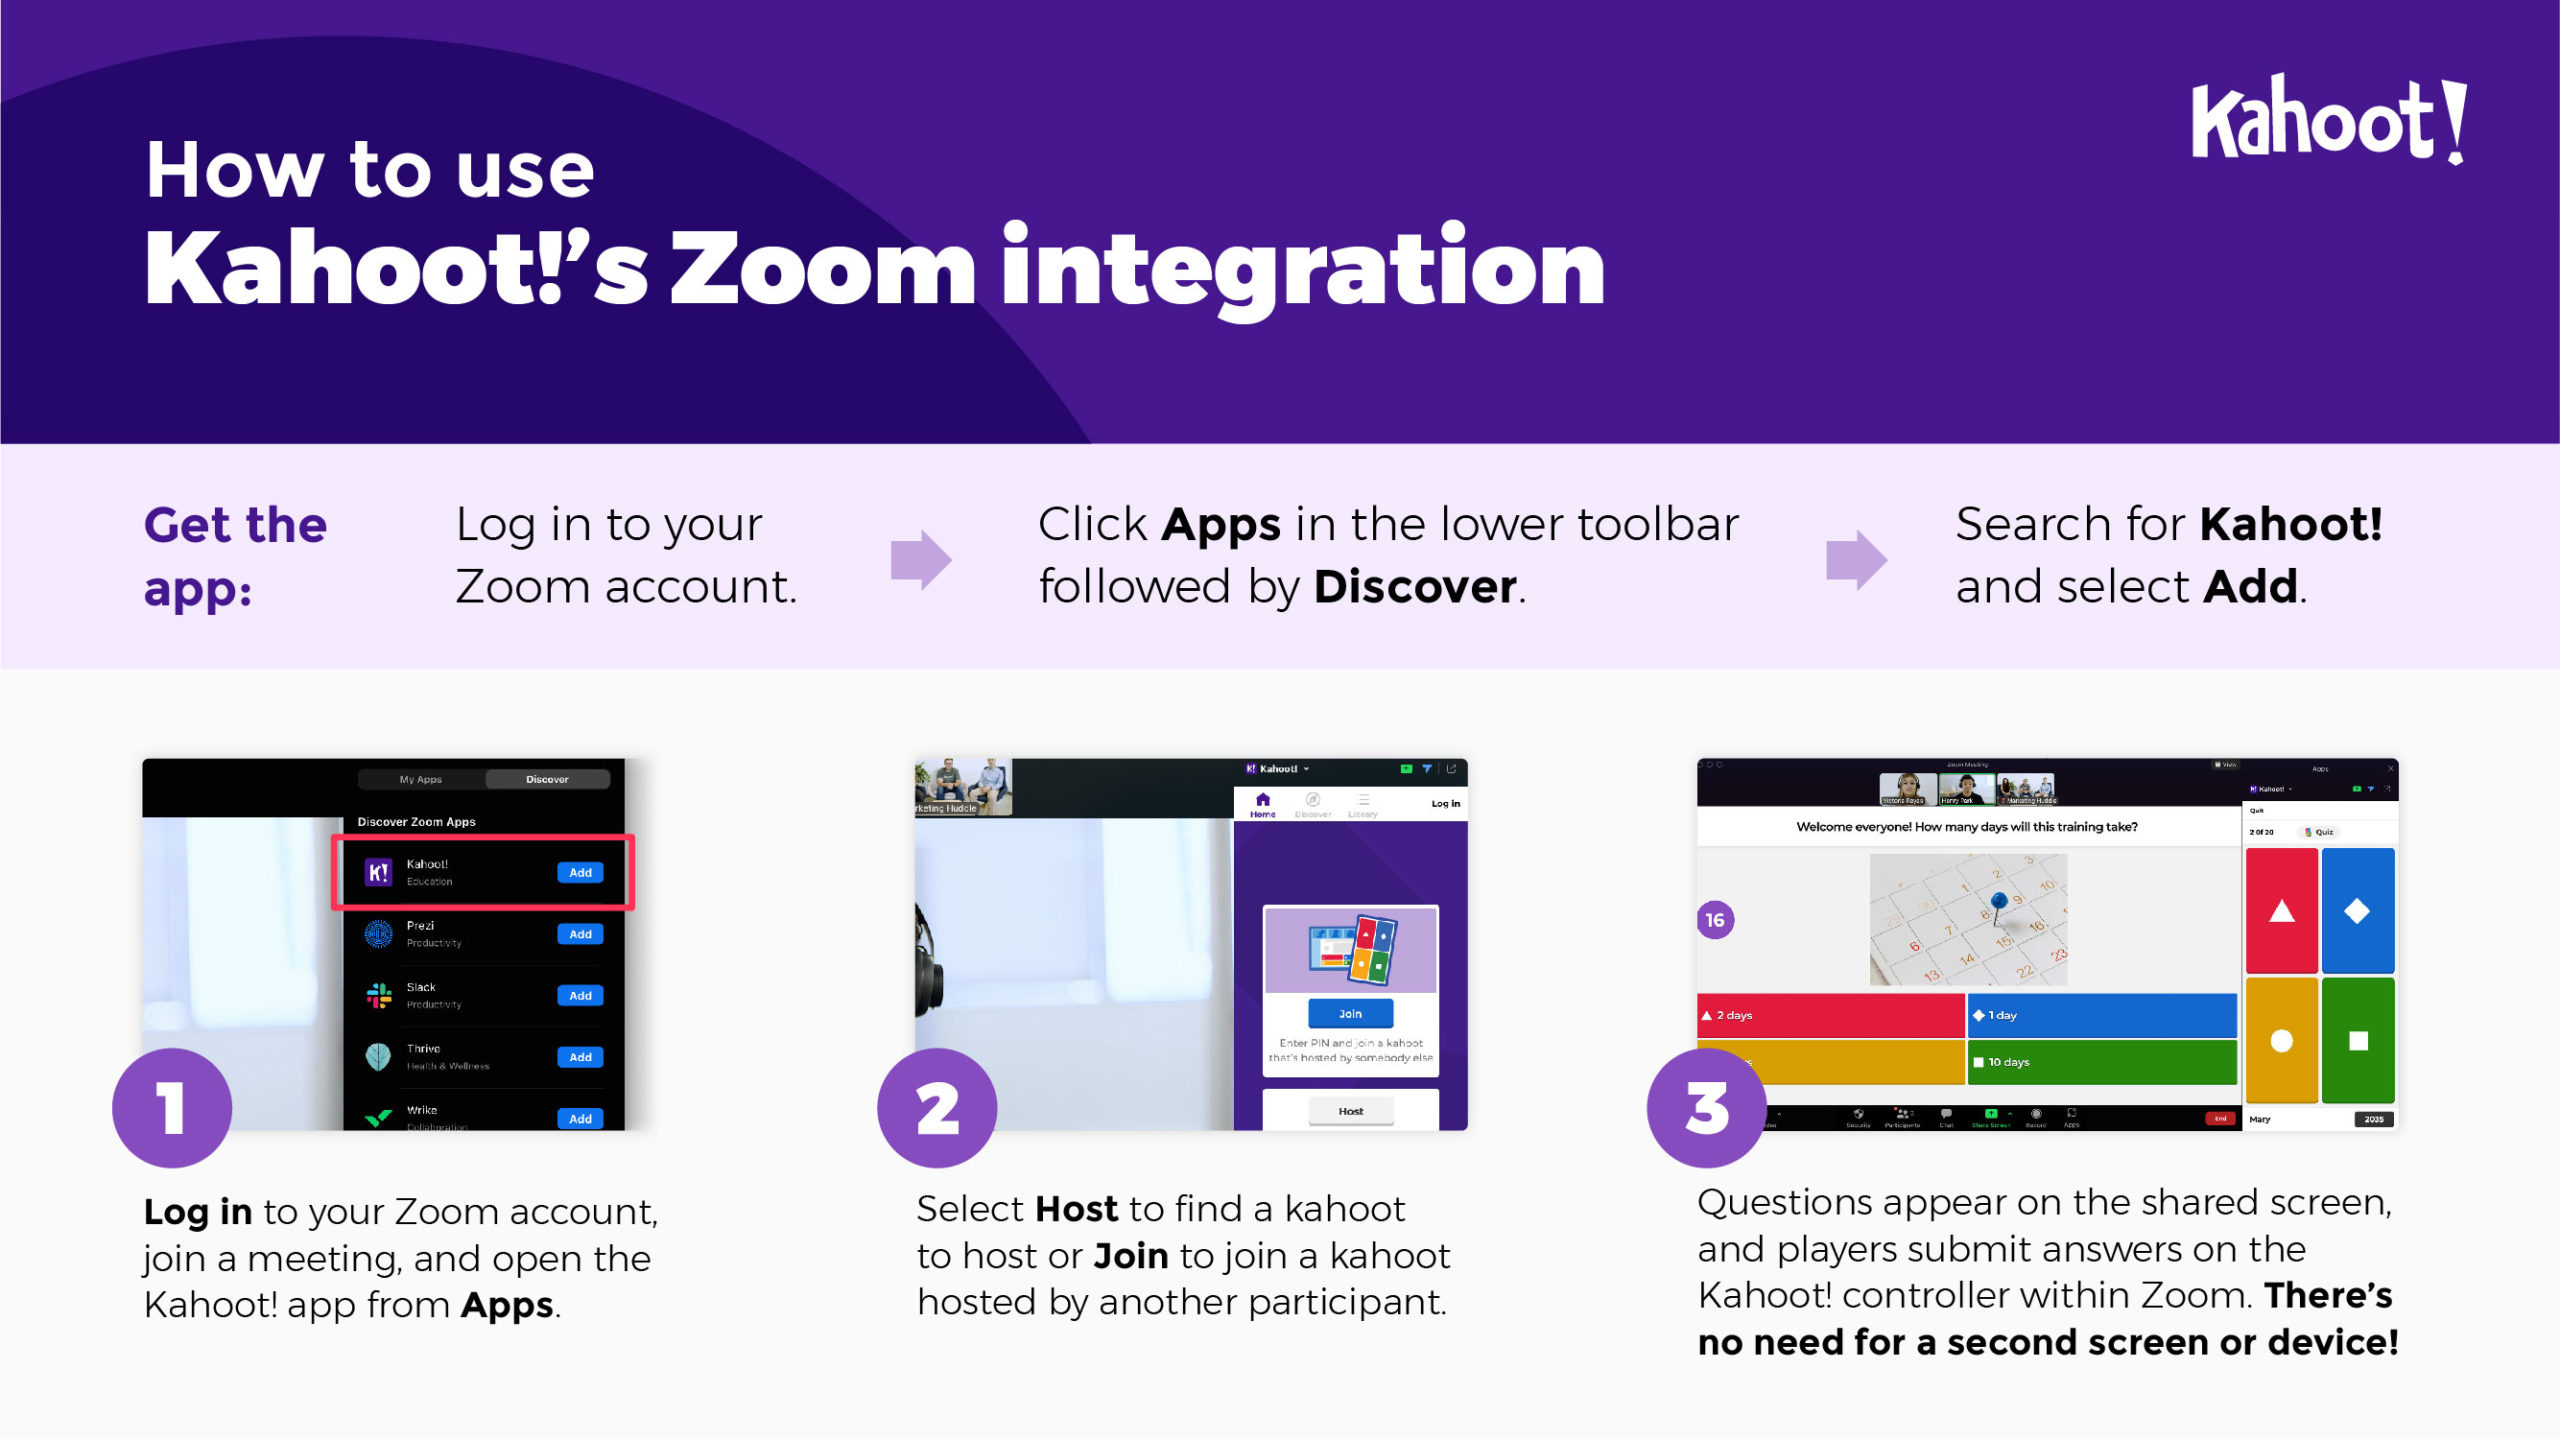 Kahoot! on Zoom | Make video meetings awesome